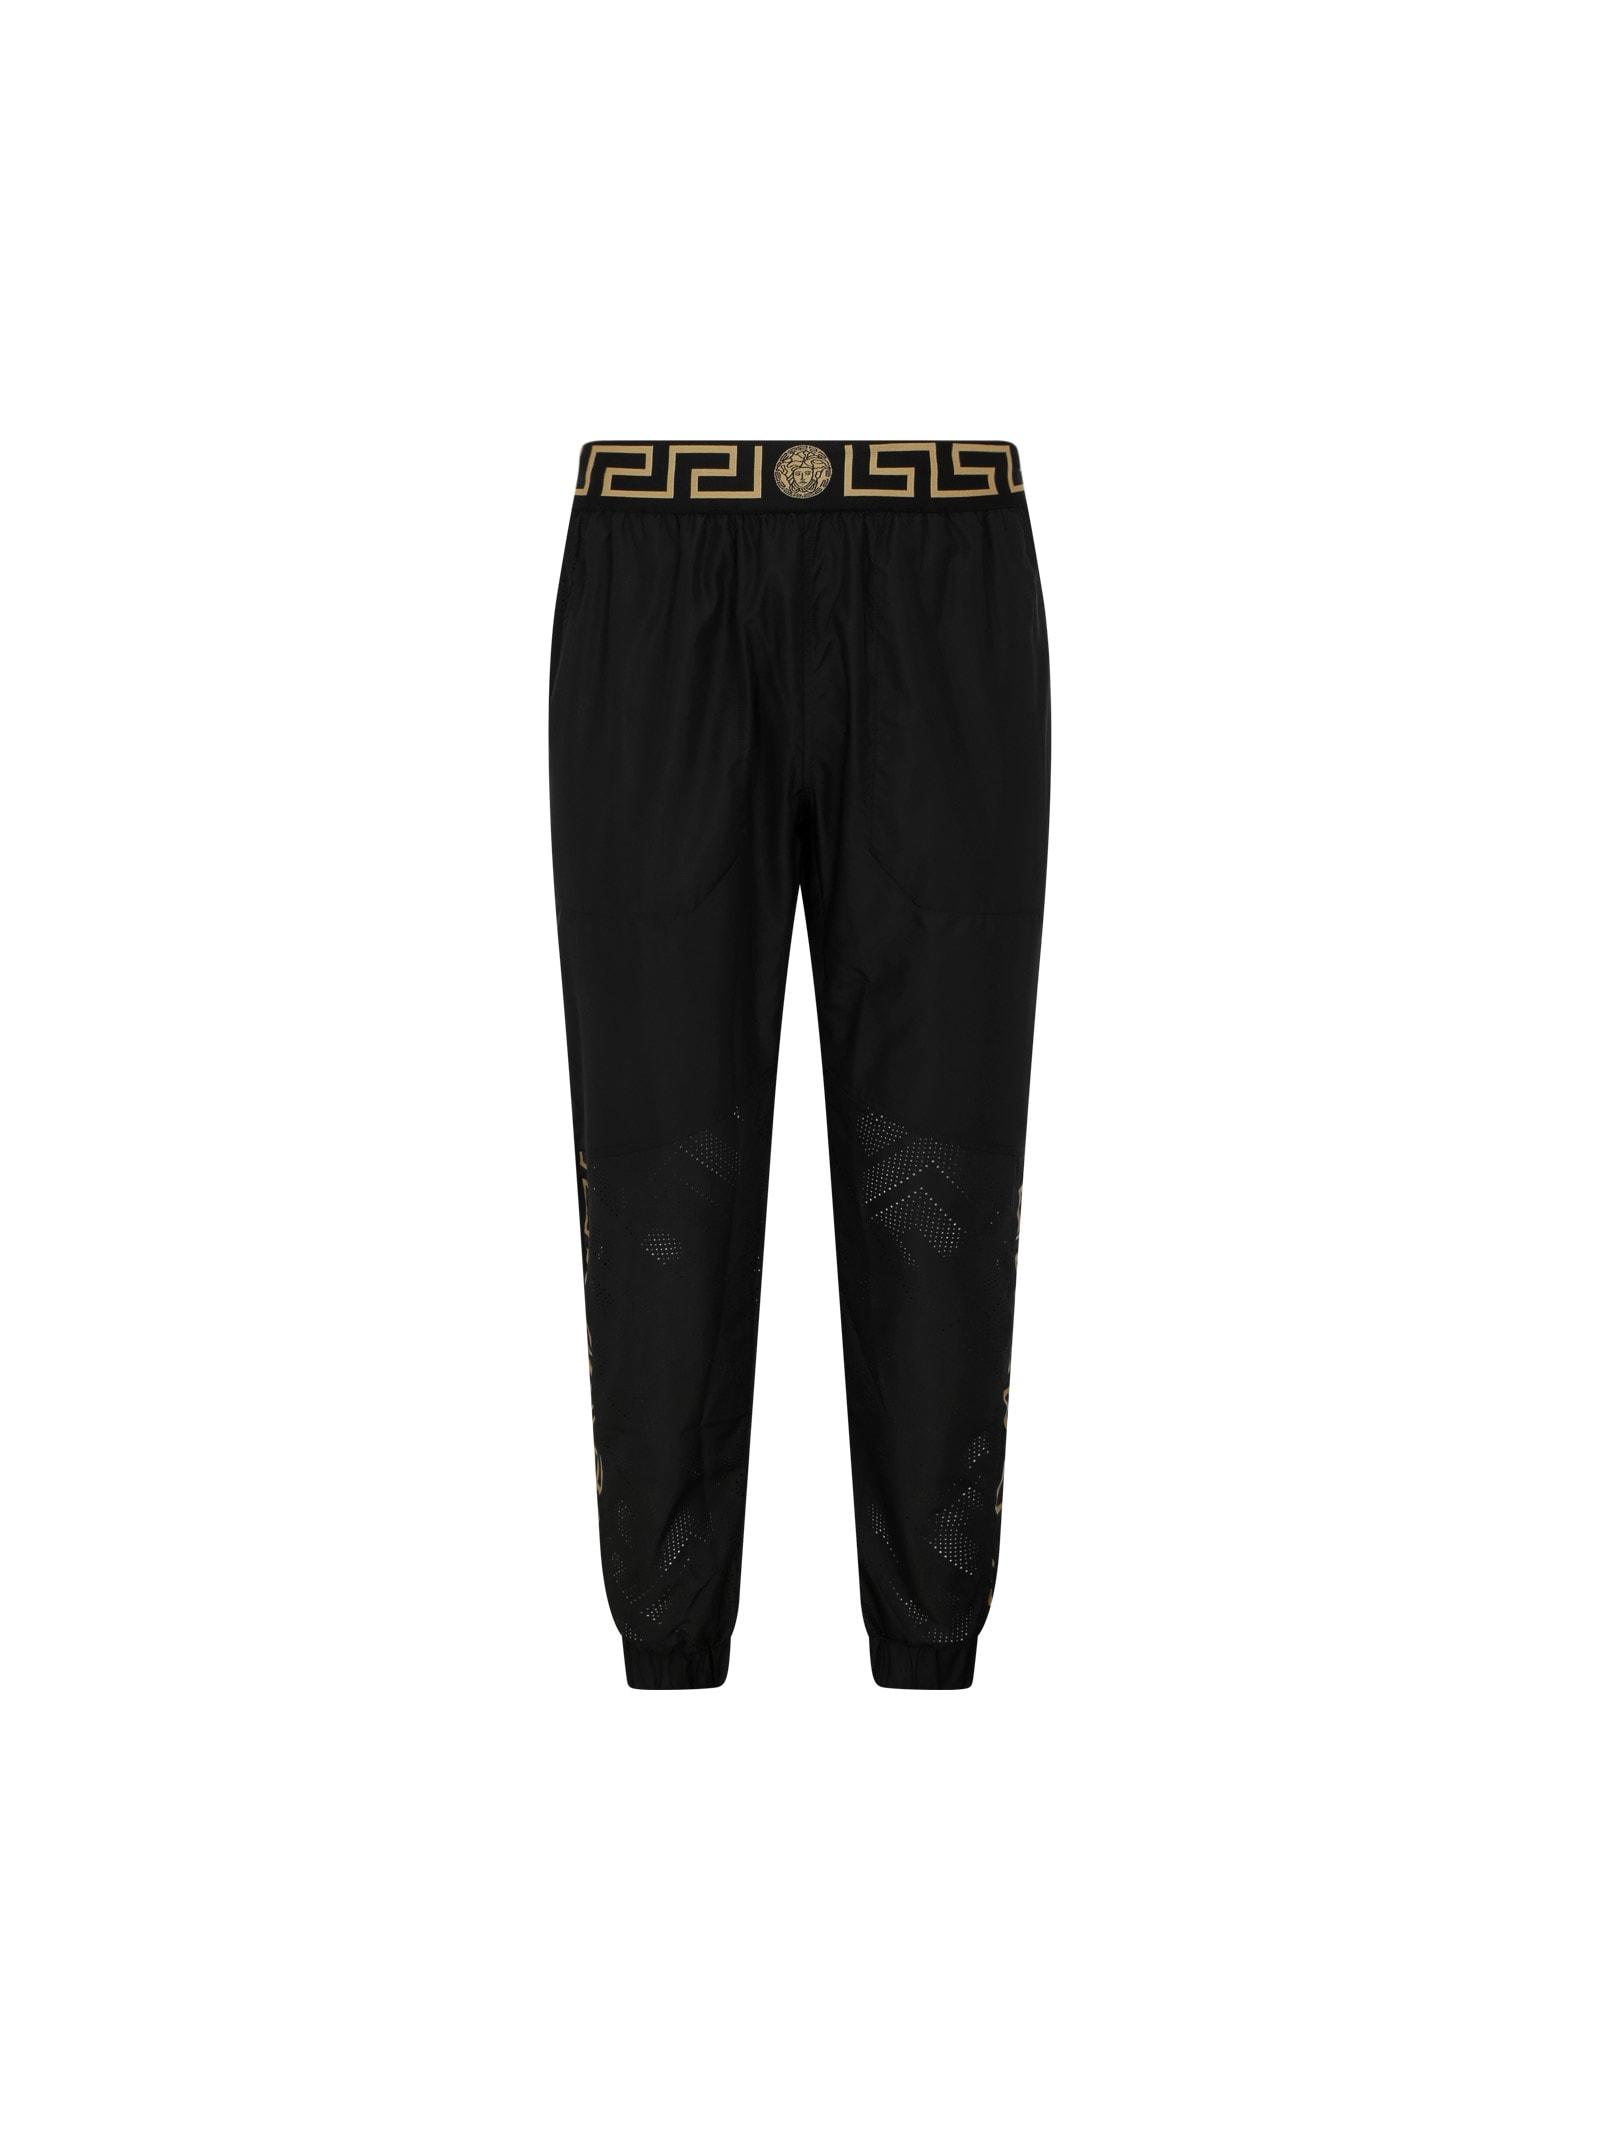 Versace Synthetic Pants in Nero (Black) for Men - Save 51% | Lyst